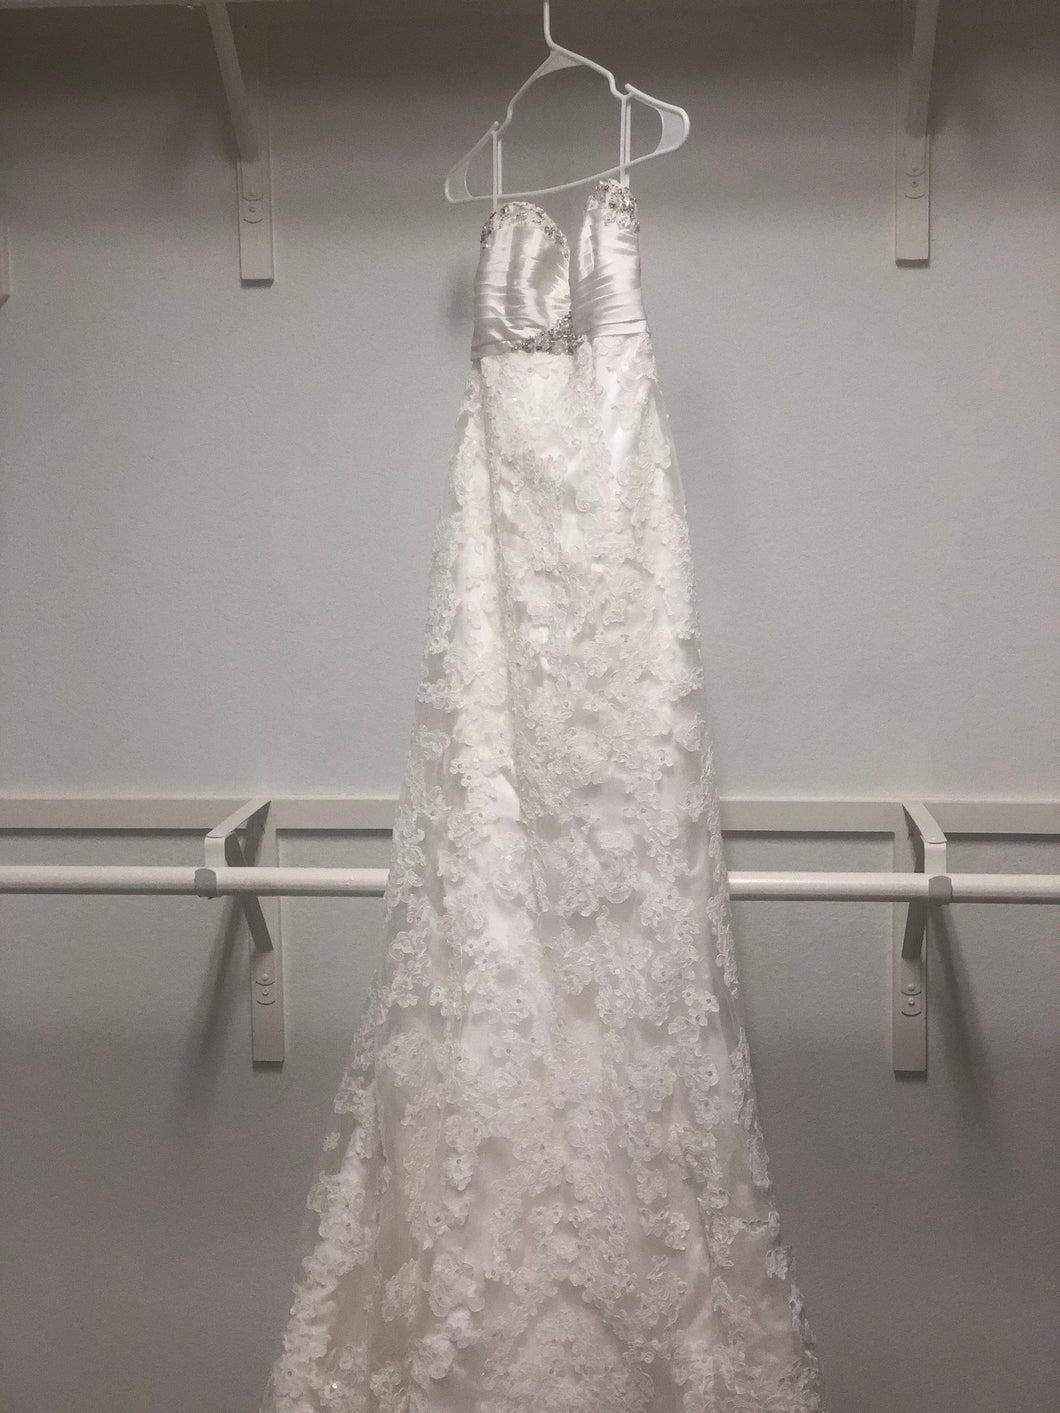 Maggie Sottero 'Sweetheart Neckline' wedding dress size-08 PREOWNED